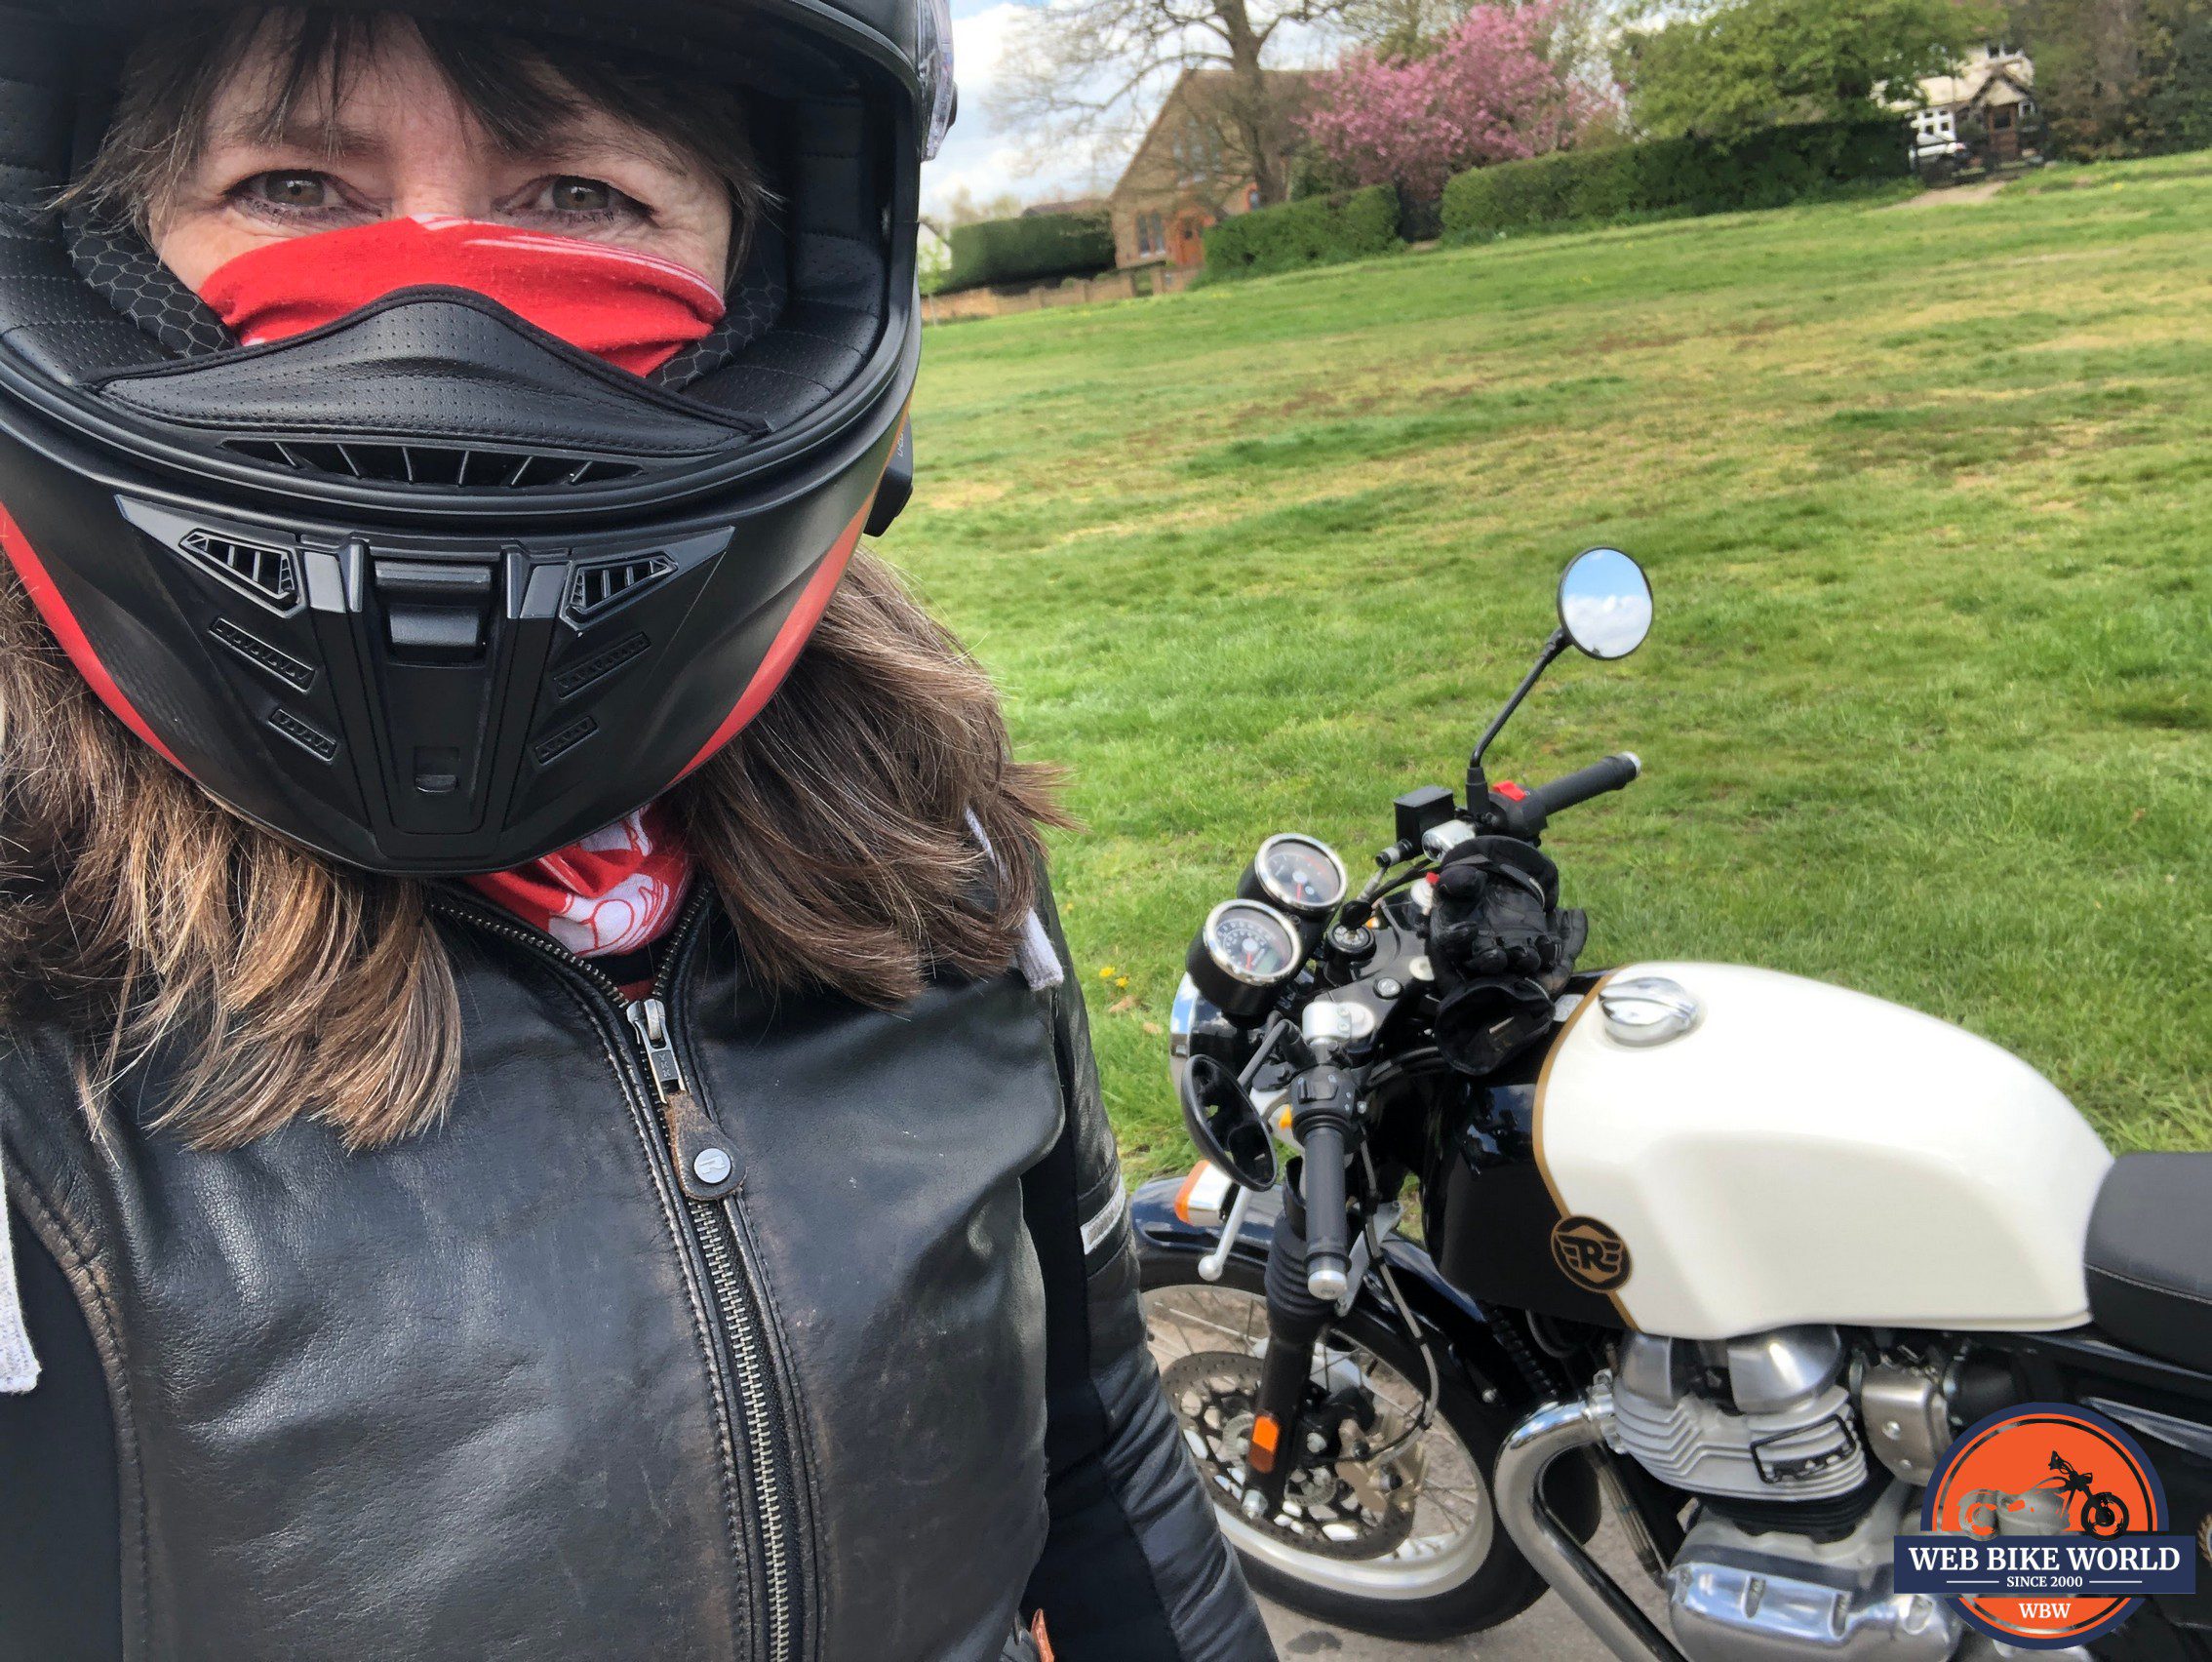 Bikerkaz taking a selfie with the 2021 Royal Enfield Continental GT650